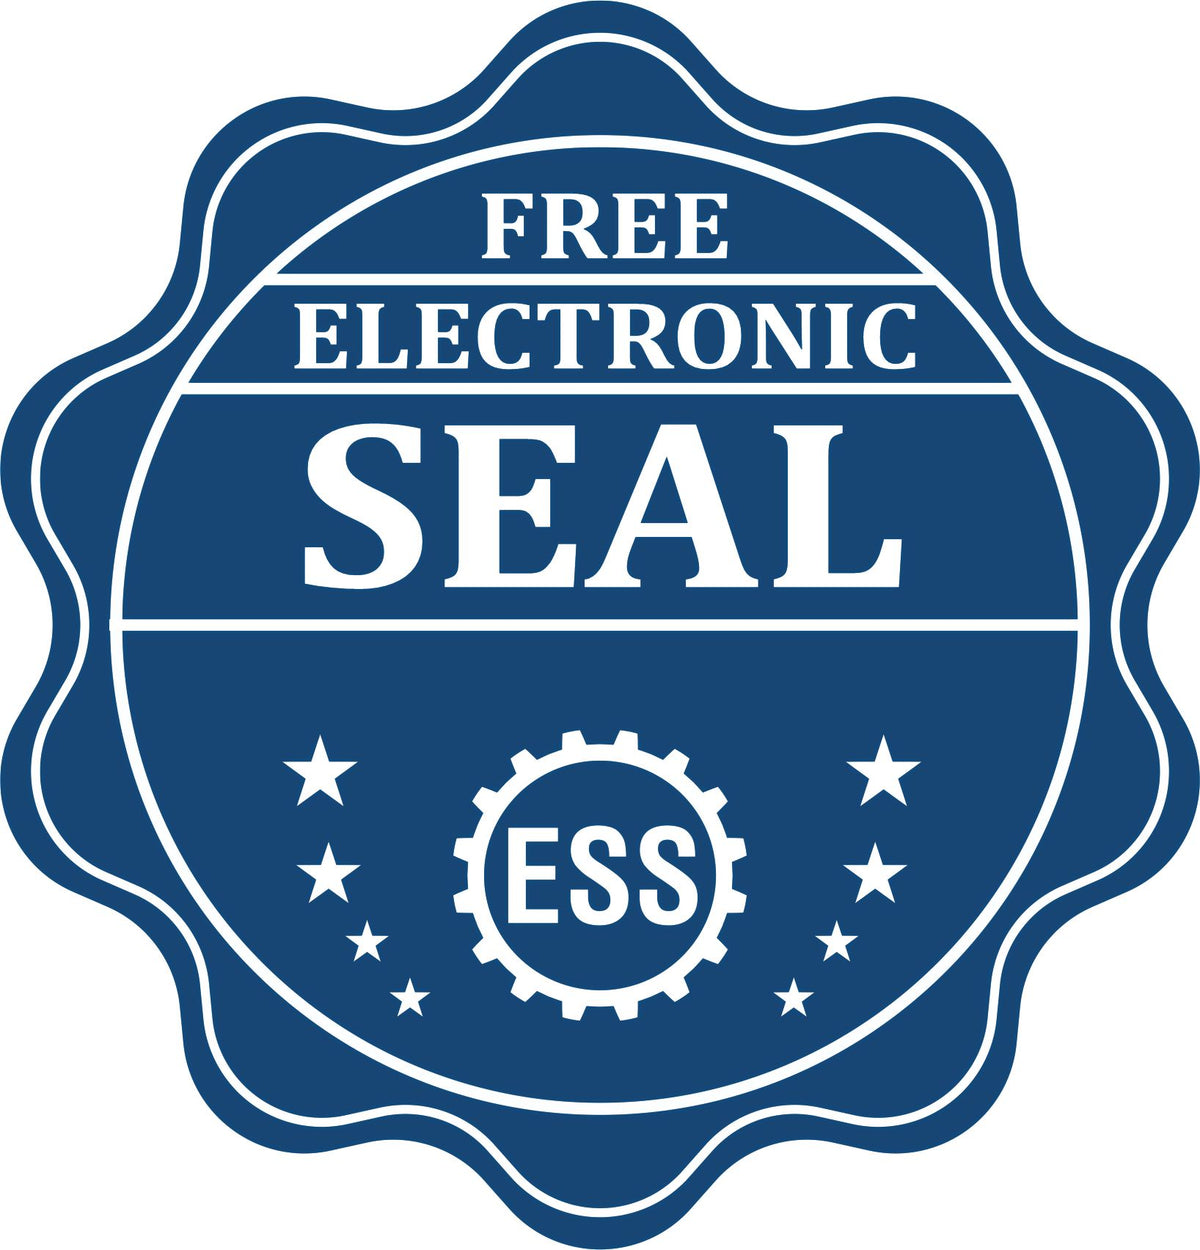 A badge showing a free electronic seal for the Soft Connecticut Professional Geologist Seal with stars and the ESS gear on the emblem.